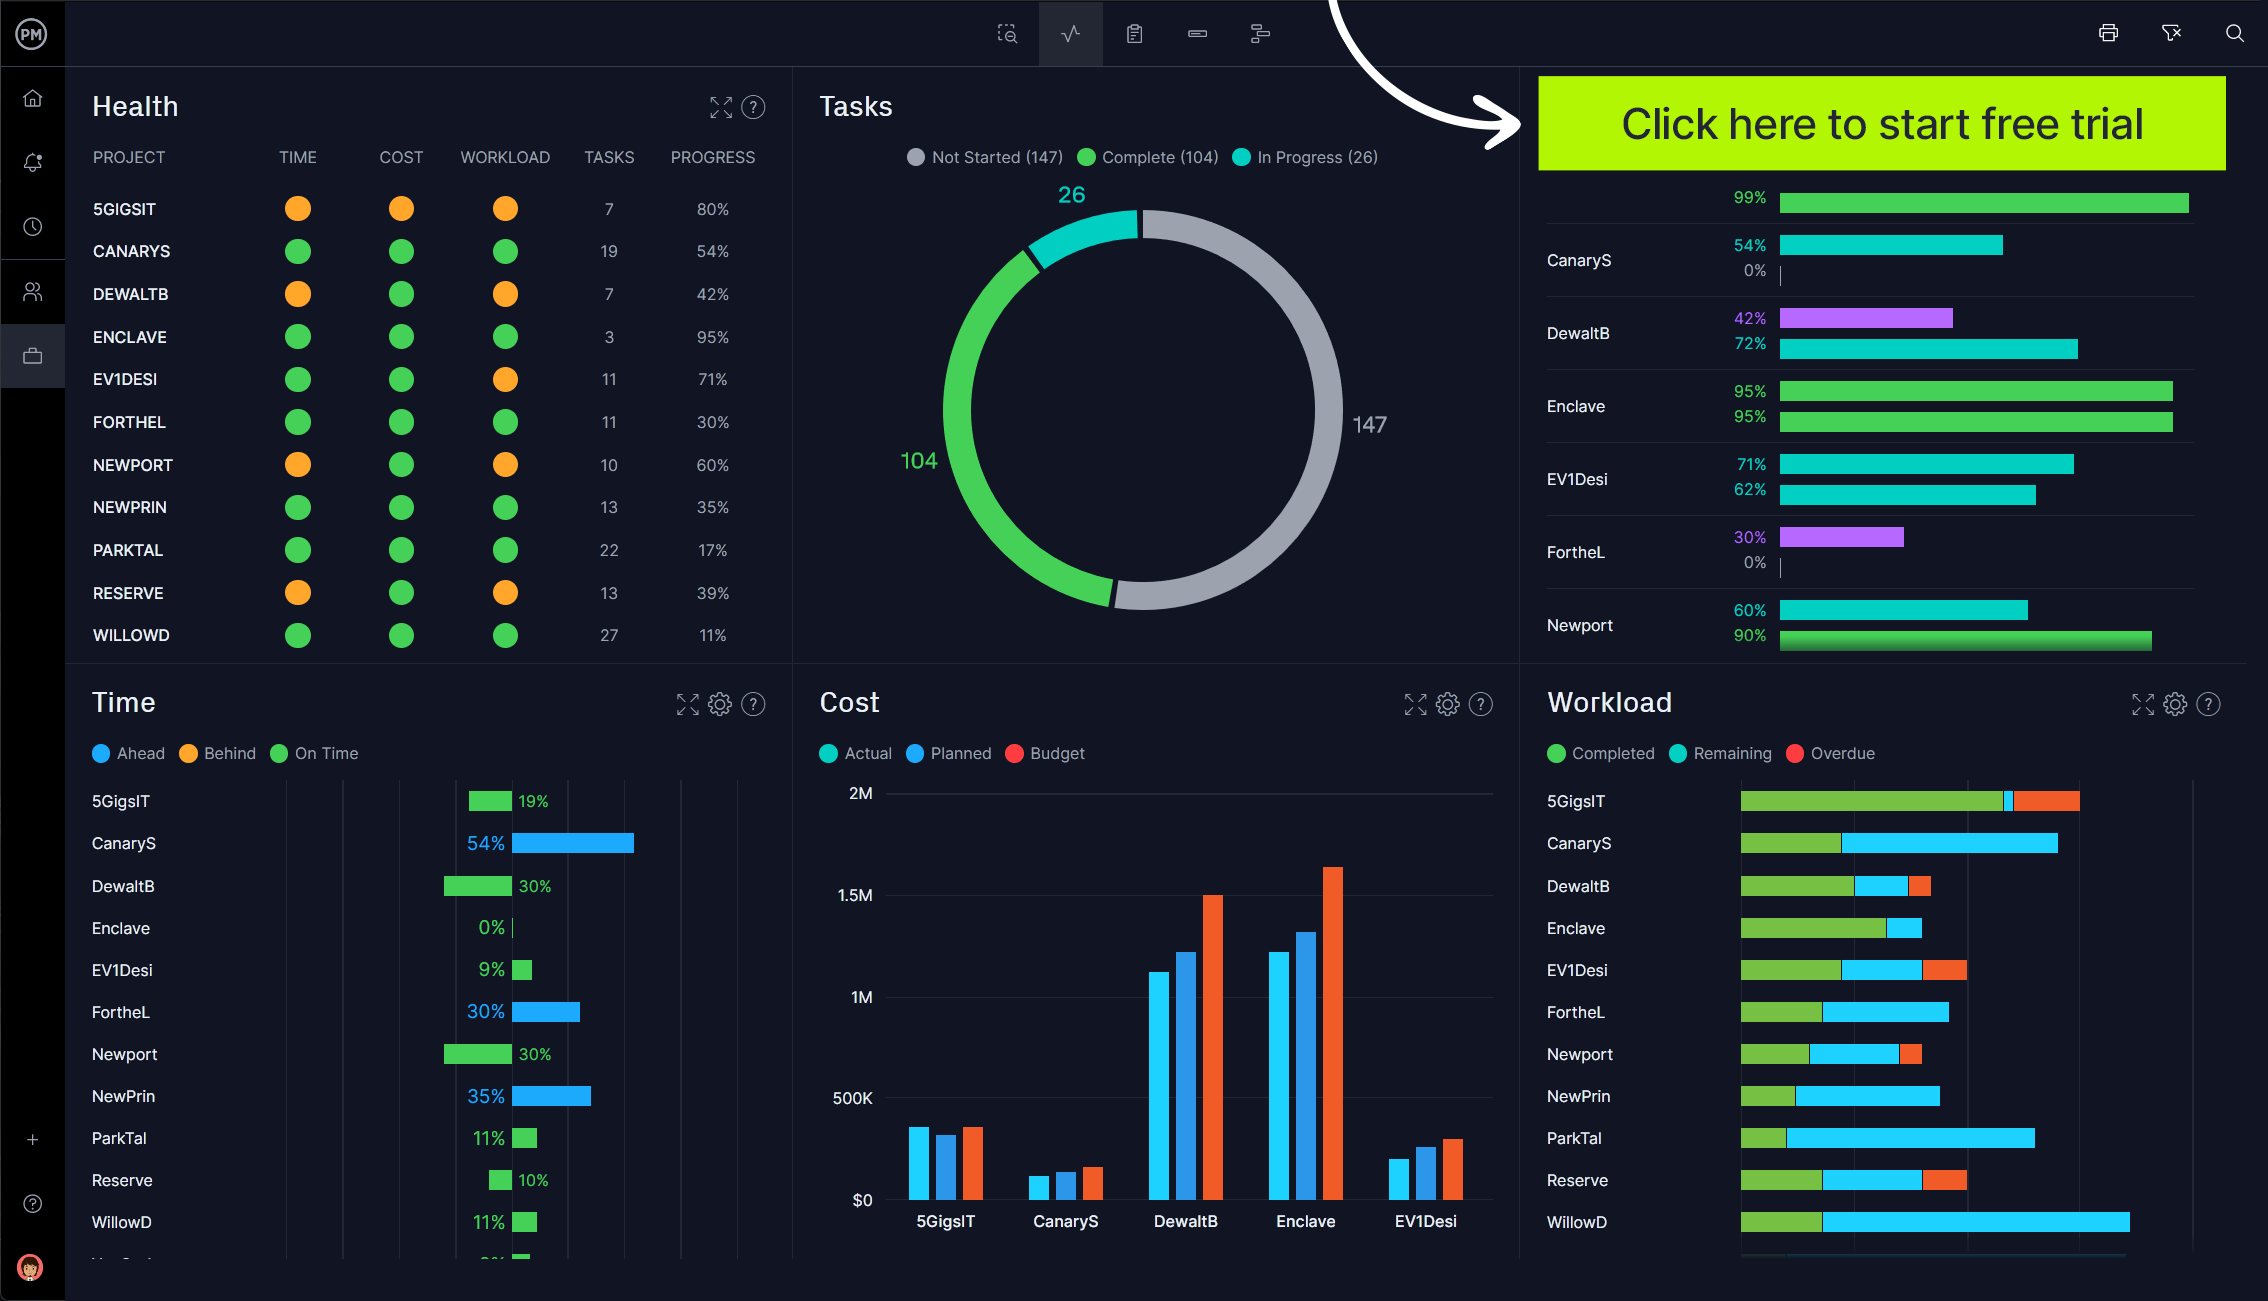 ProjectManager's real-time portfolio dashboard